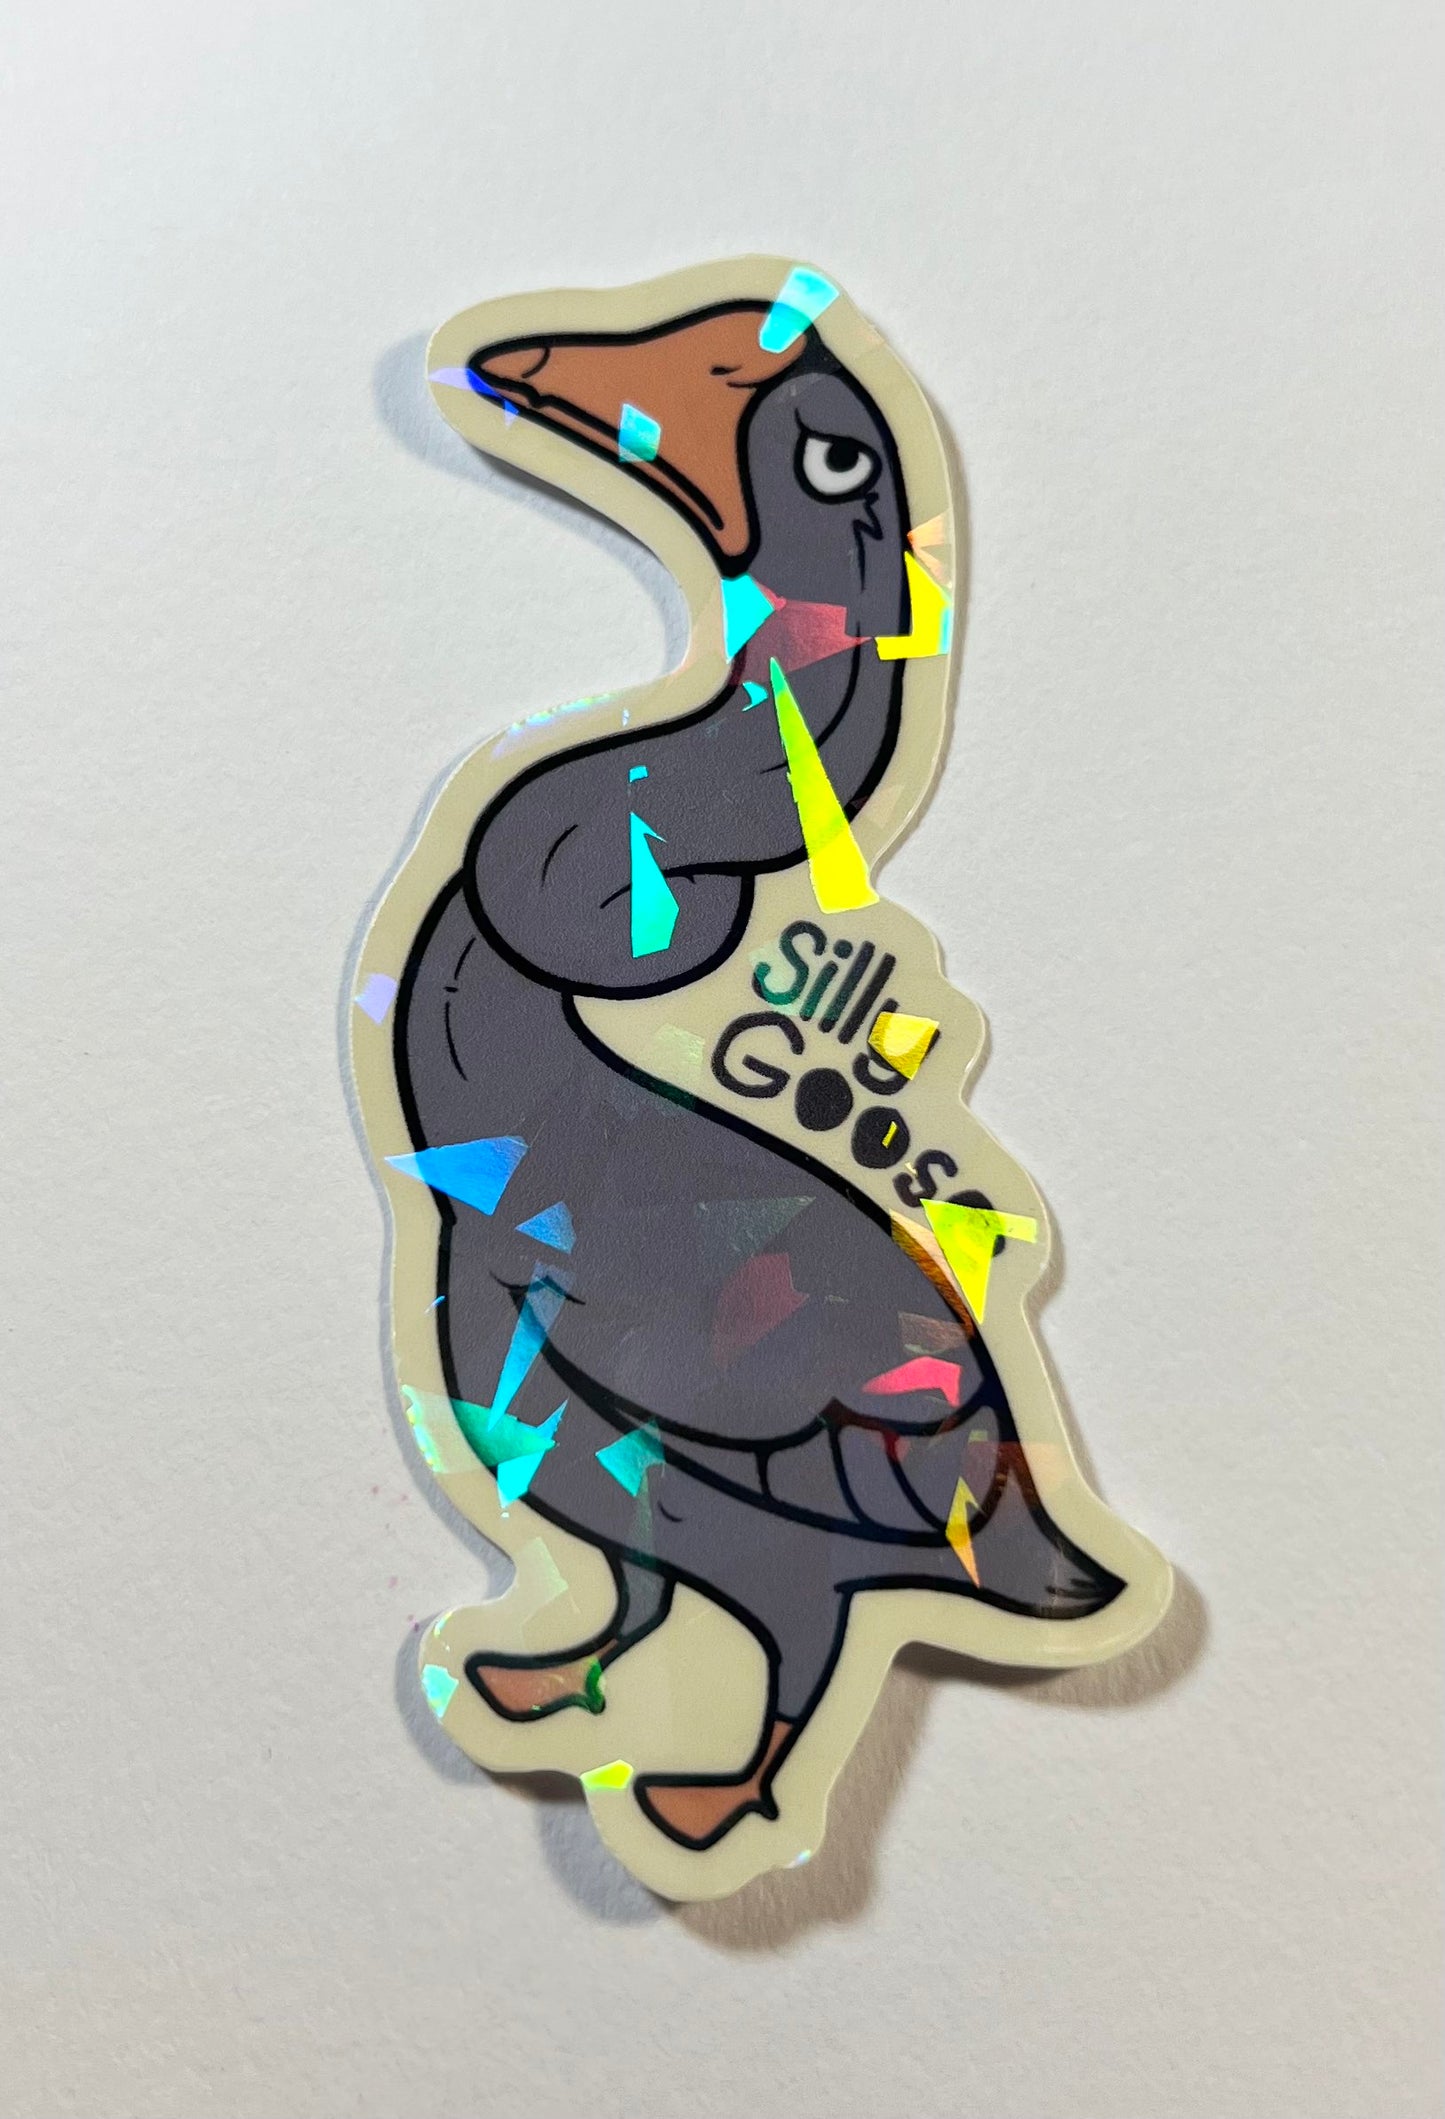 Silly Goose - 3 Inch Vinyl Sticker - Holographic